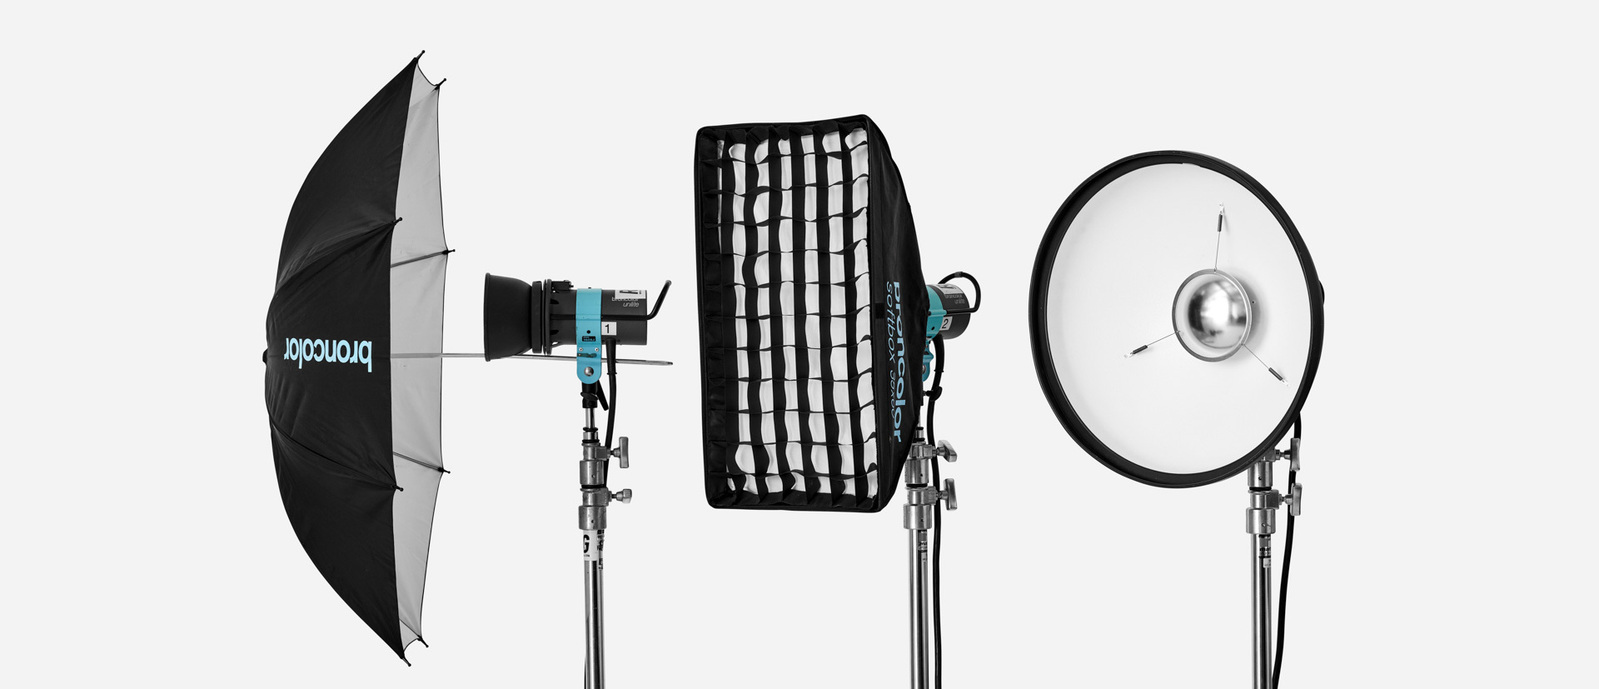 Los Angeles professional and affordable photo studio for photography and video production. Broncolor Strobe Lighting Equipment for Rental on white background. Broncolor Unilight, Broncolor Softbox, Broncolor white beauty dish